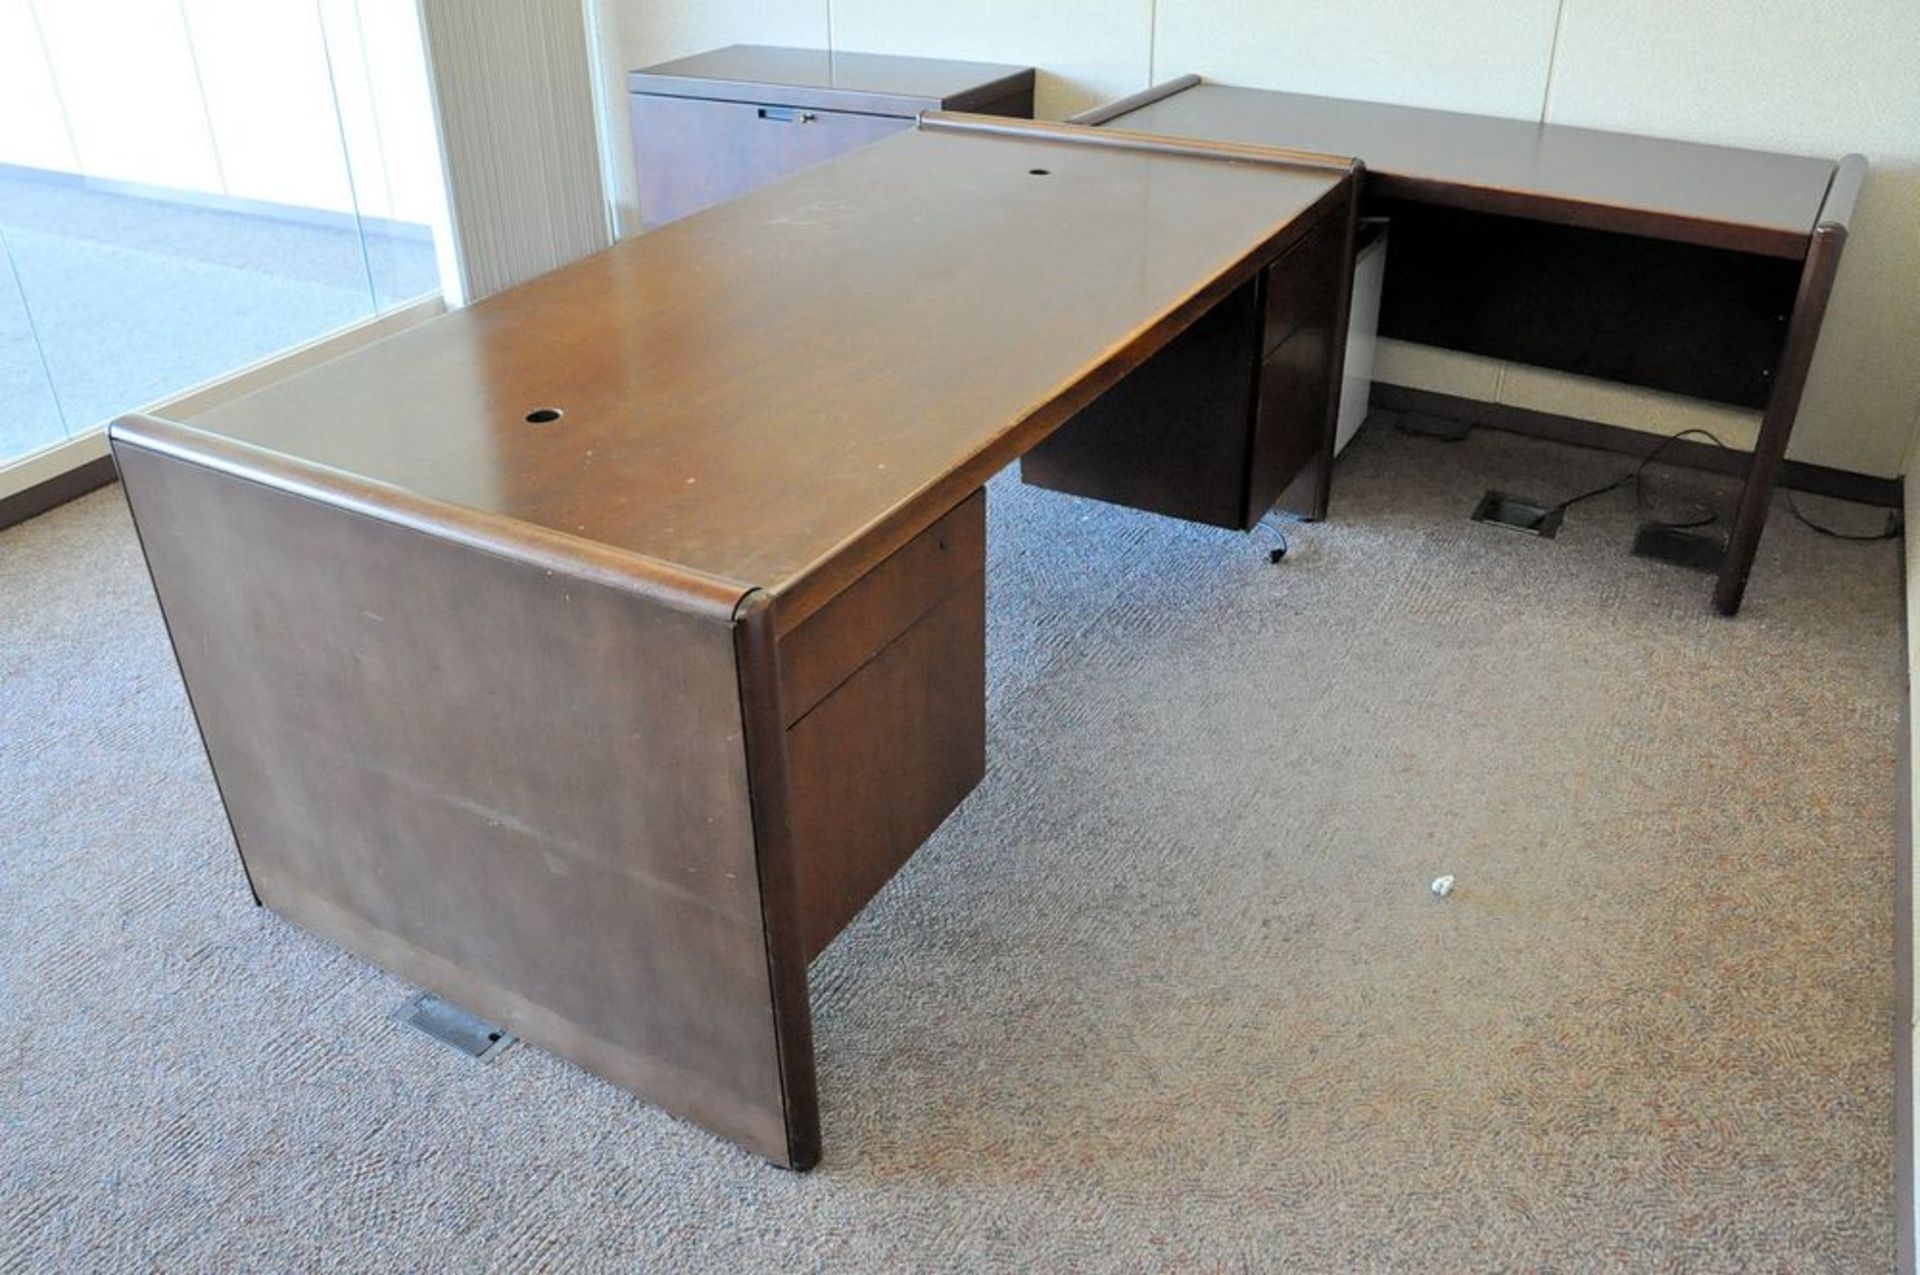 Lot-(1) Desk, (2) Lateral File Cabinets, (1) Table, and (1) 2-Door Storage Cabinet in (1) Office, ( - Image 3 of 4